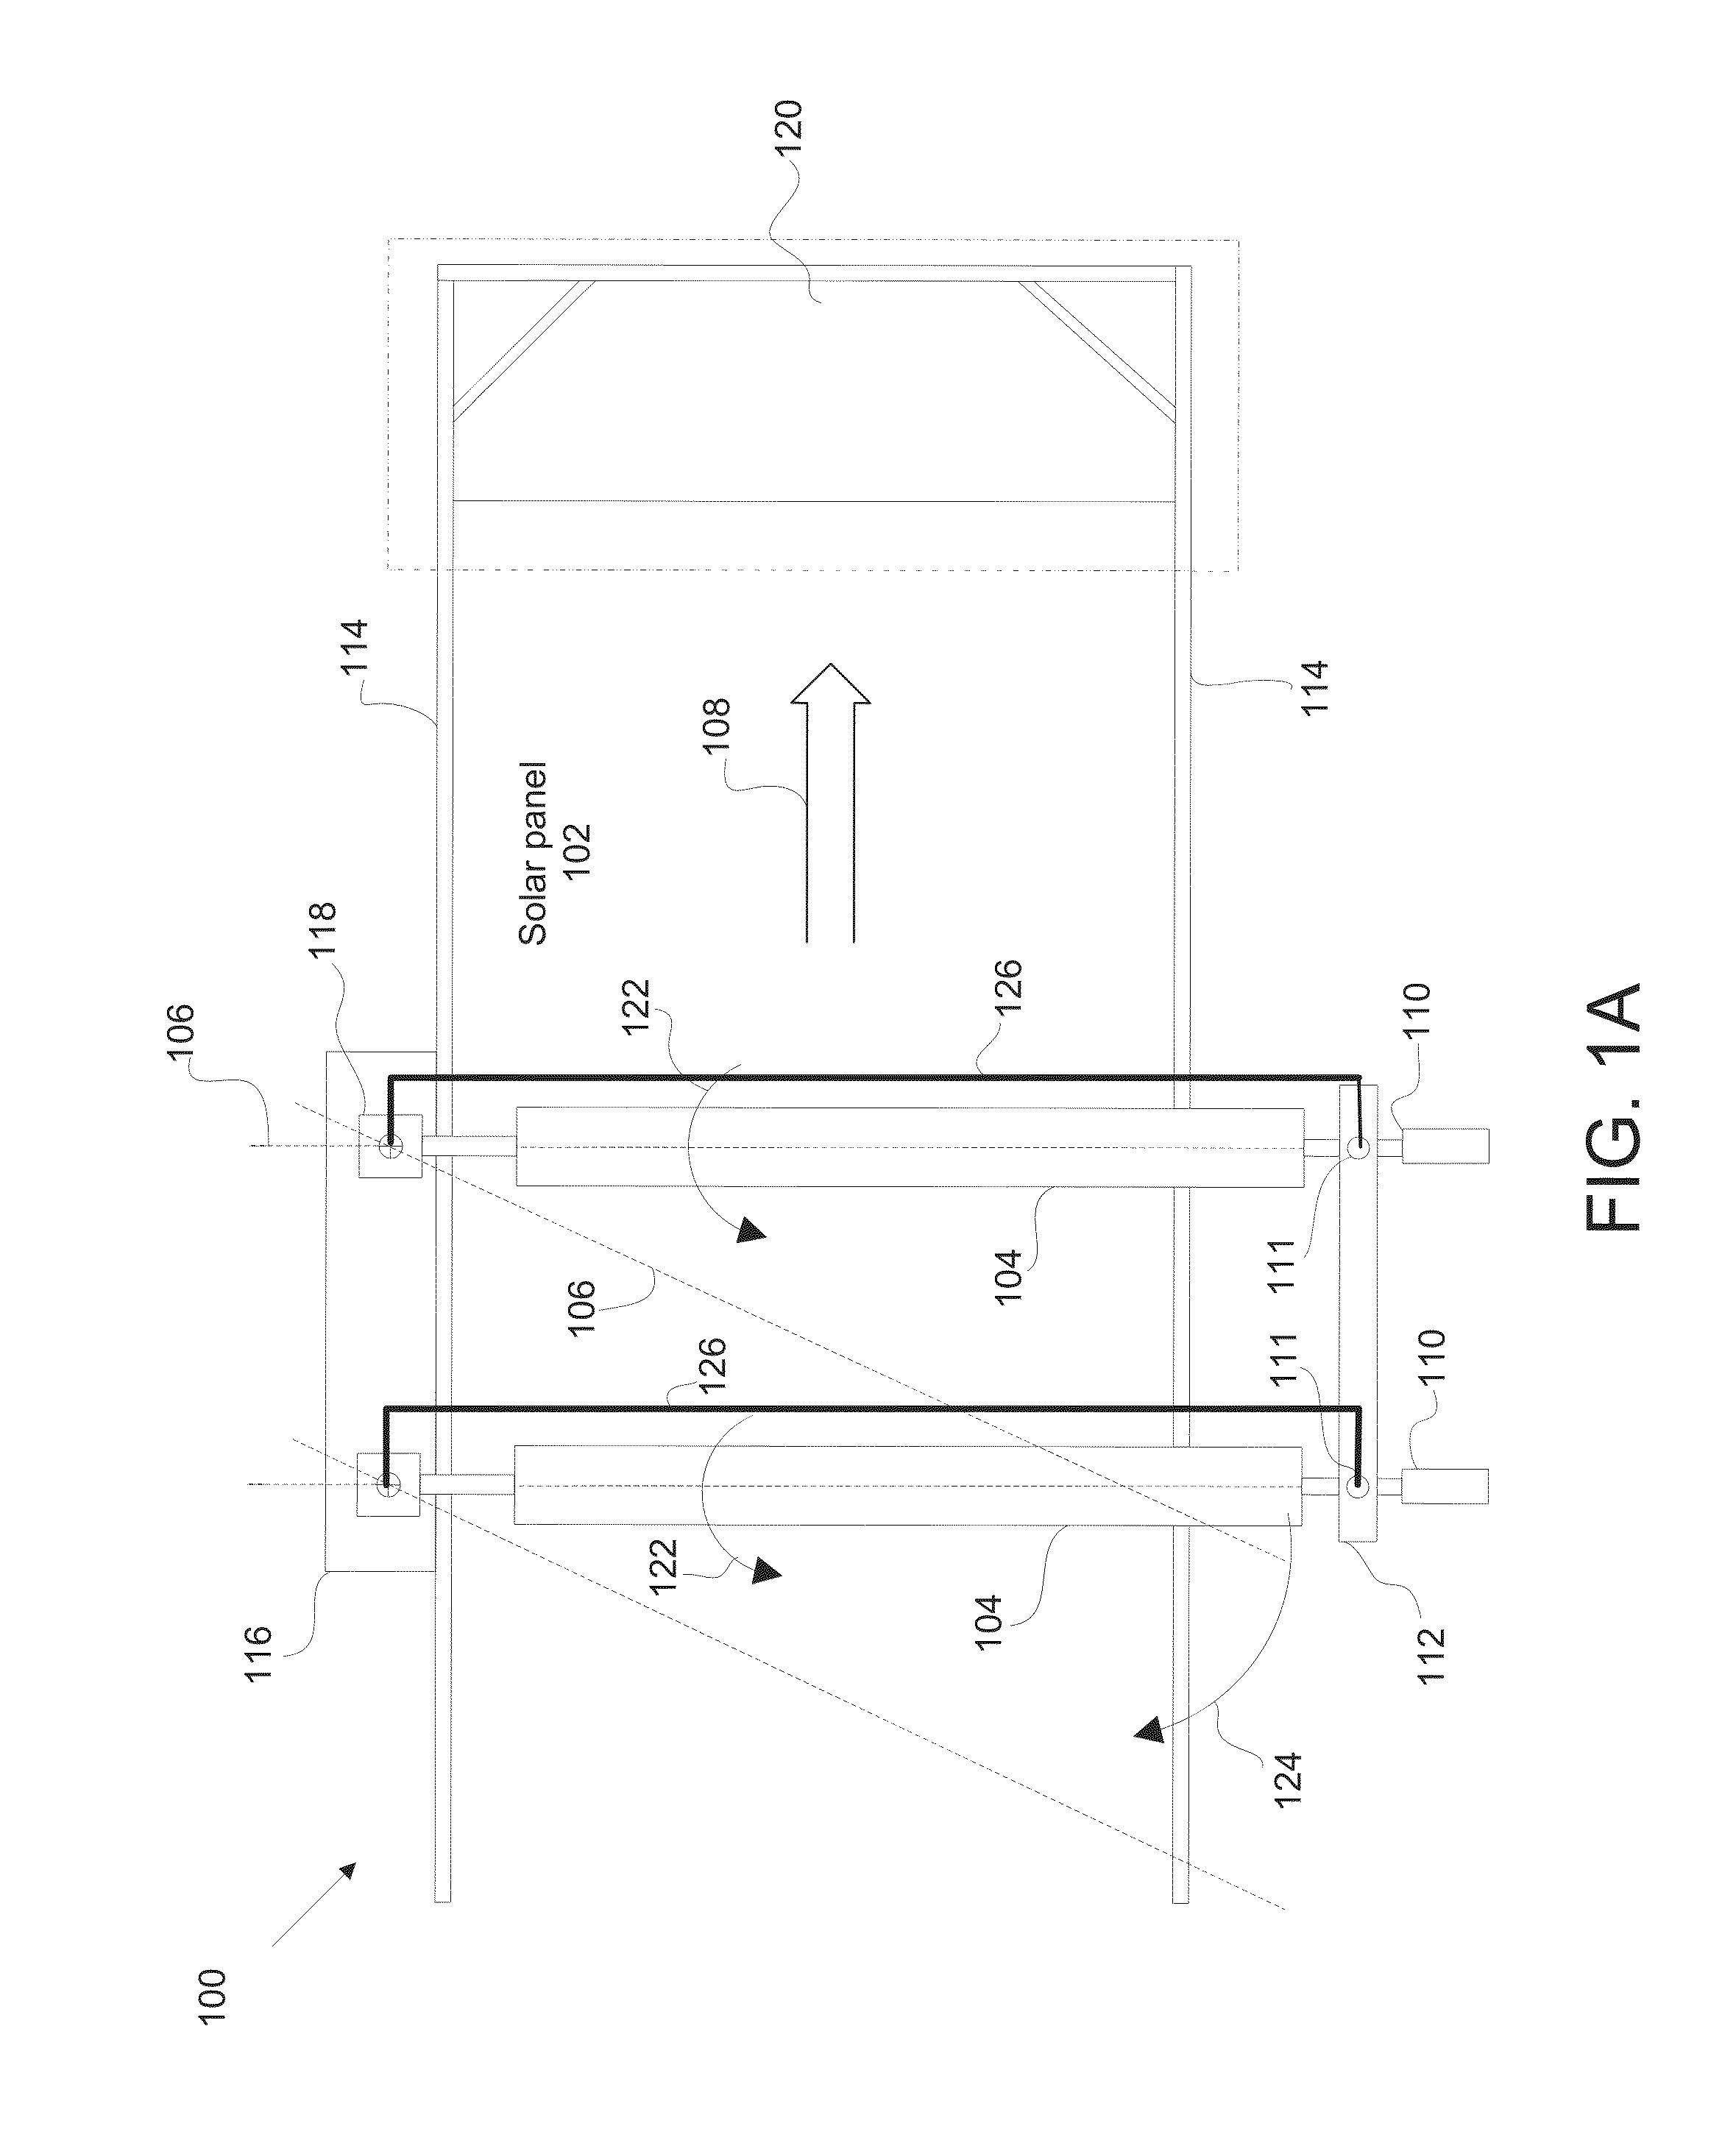 Apparatuses, systems and methods for cleaning photovoltaic devices